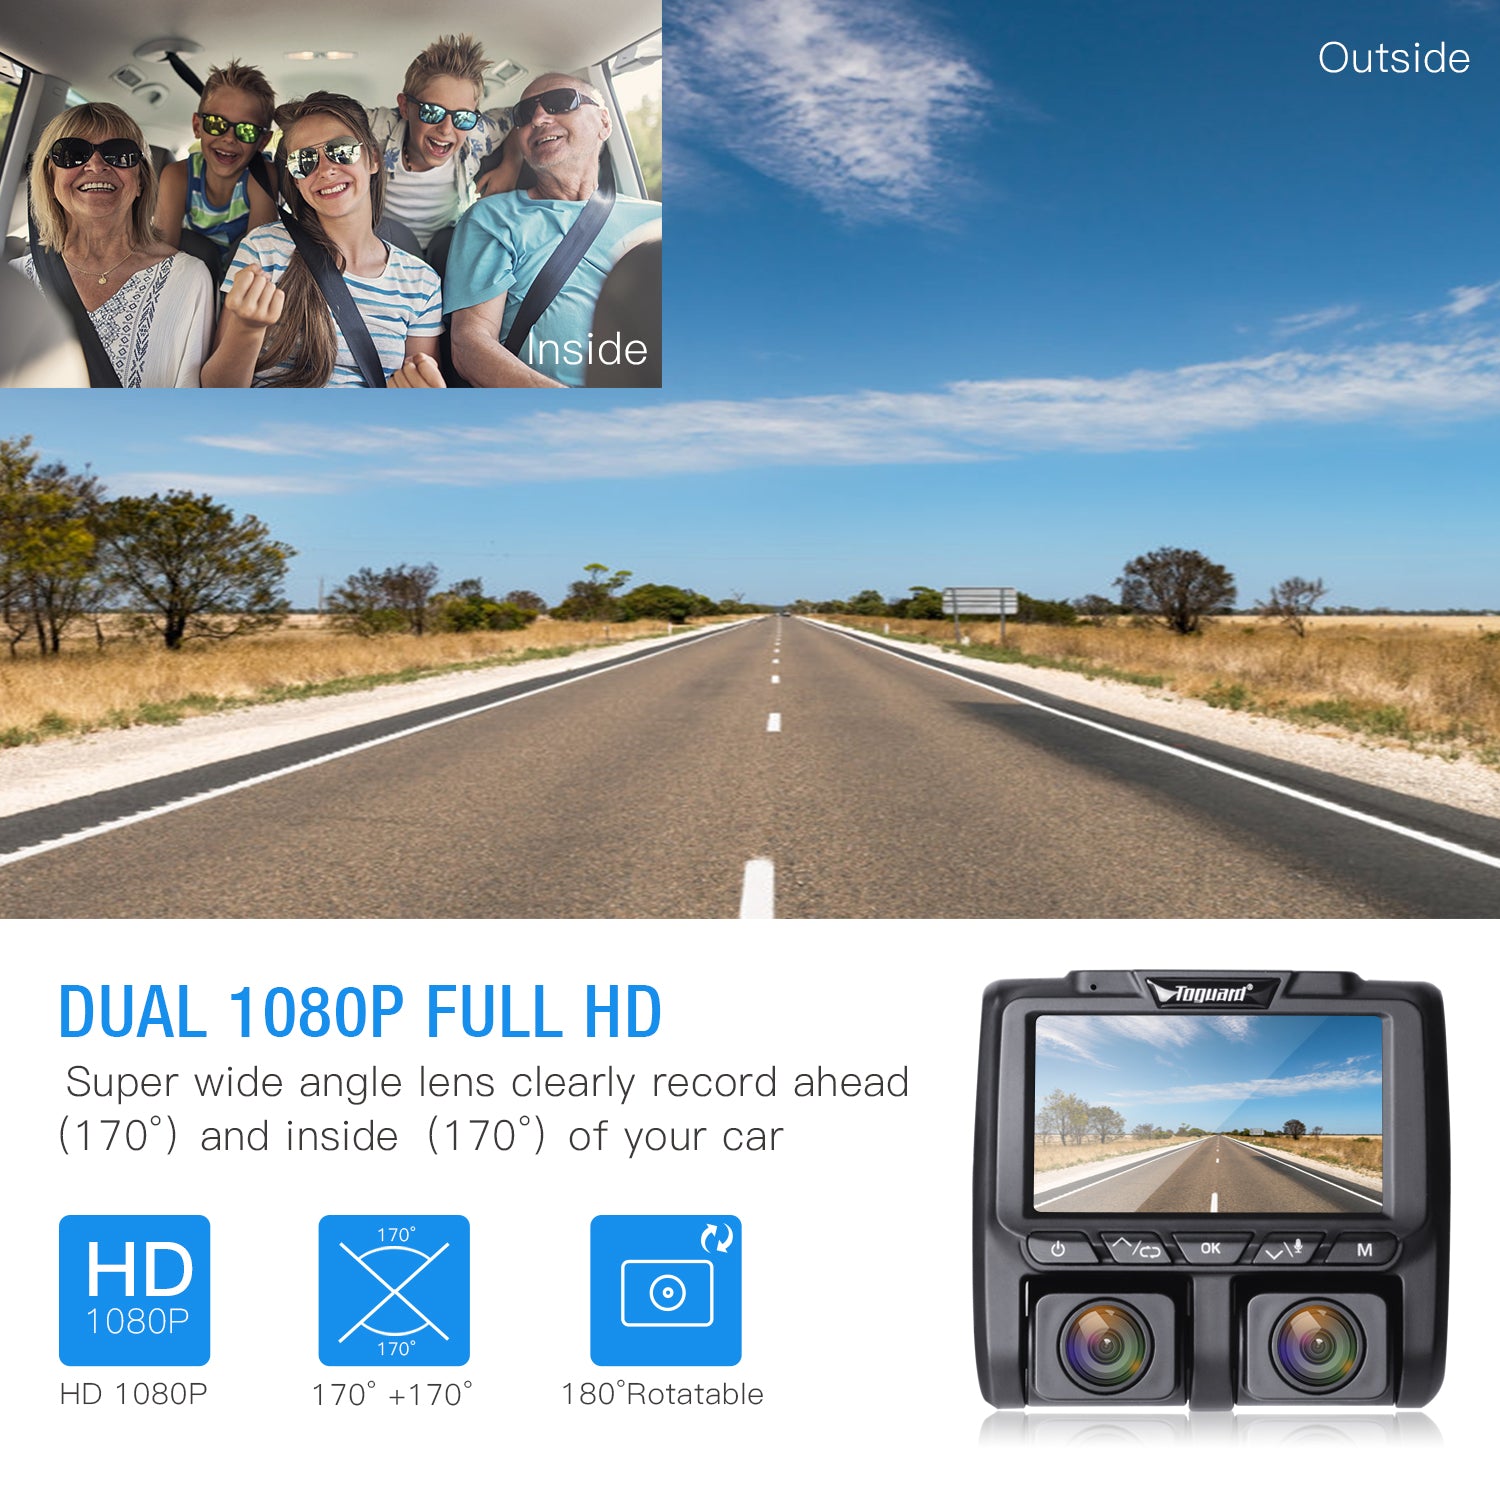 Toguard CE45 Uber Dual Dash Cam Full HD  1080P Inside and Outside Car Camera （Only Available In The US）